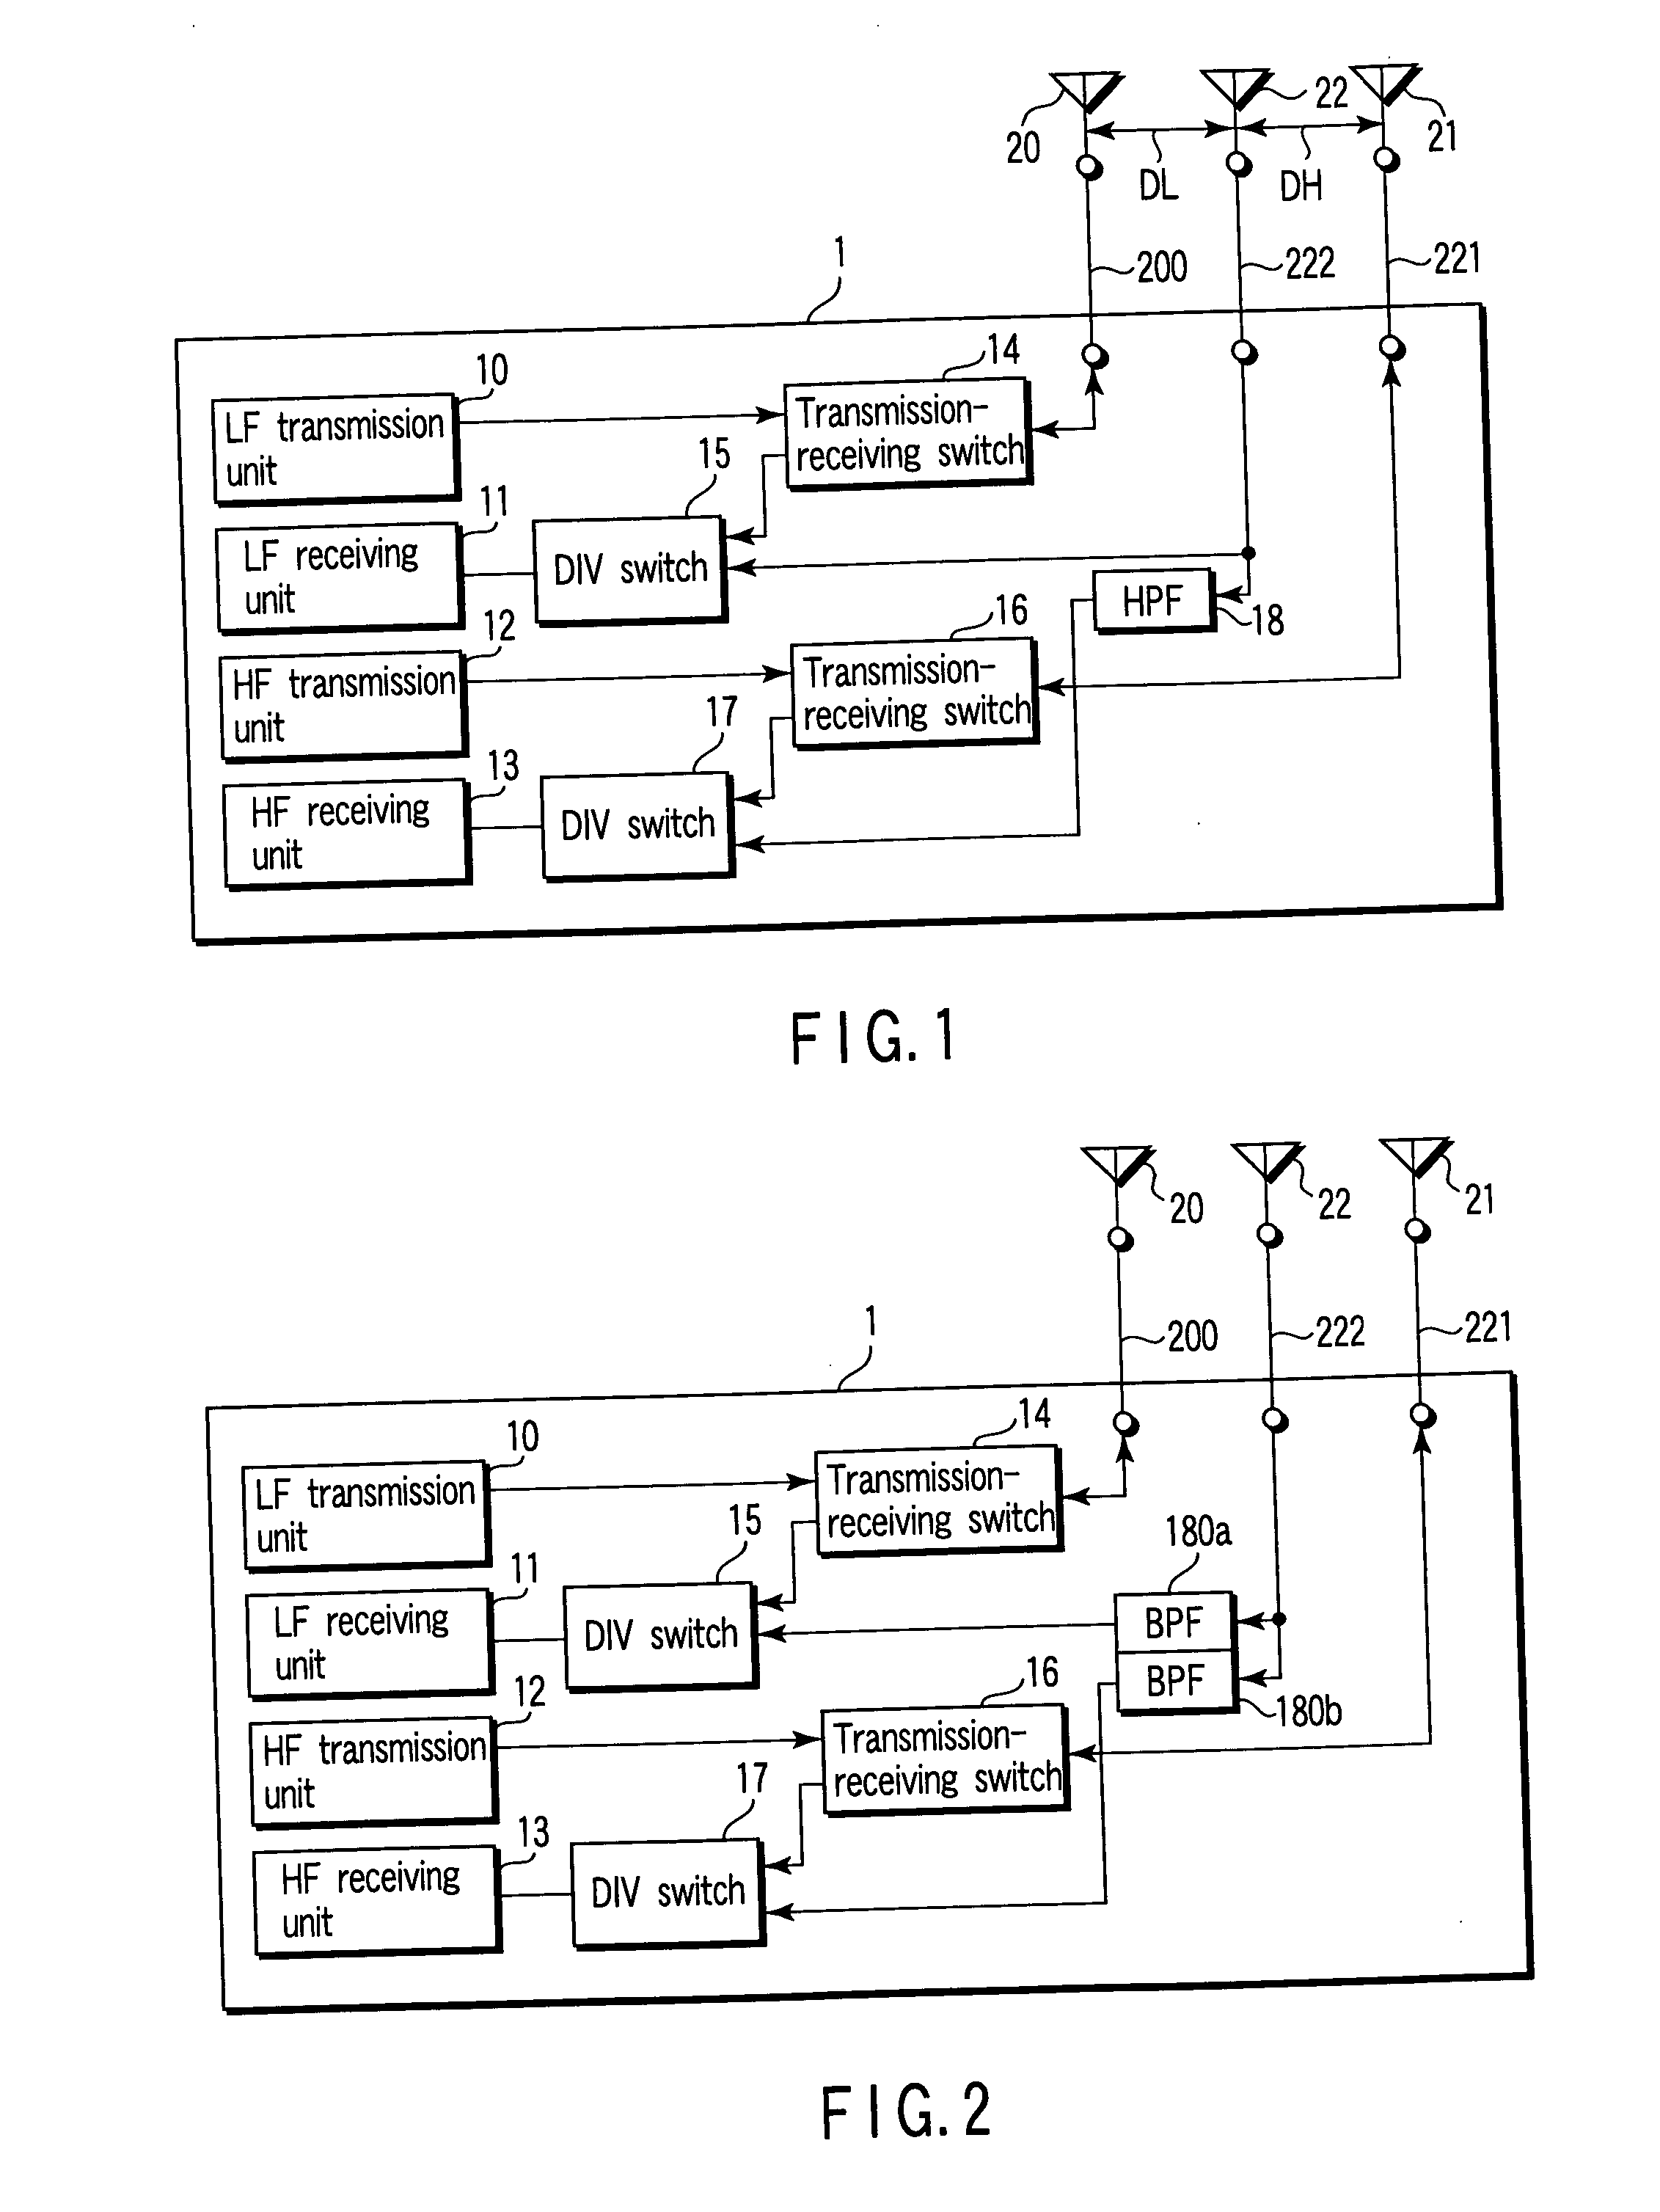 Antenna structure for electronic device with wireless communication unit